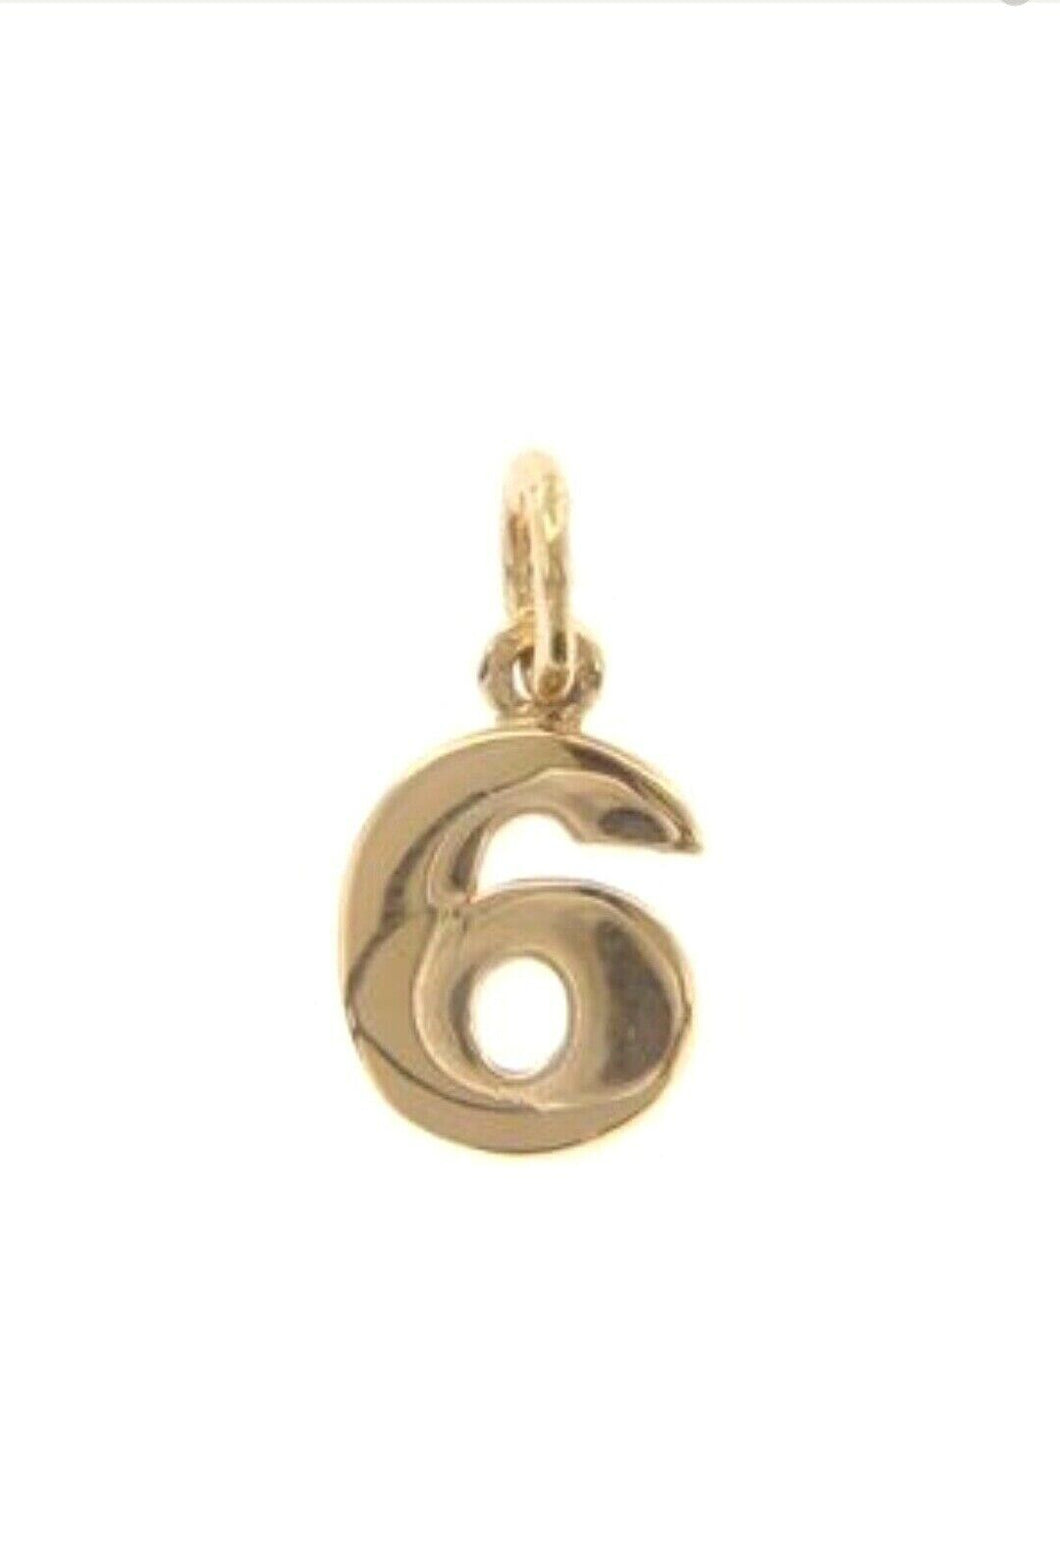 18k yellow gold number 6 six small pendant charm, 0.4